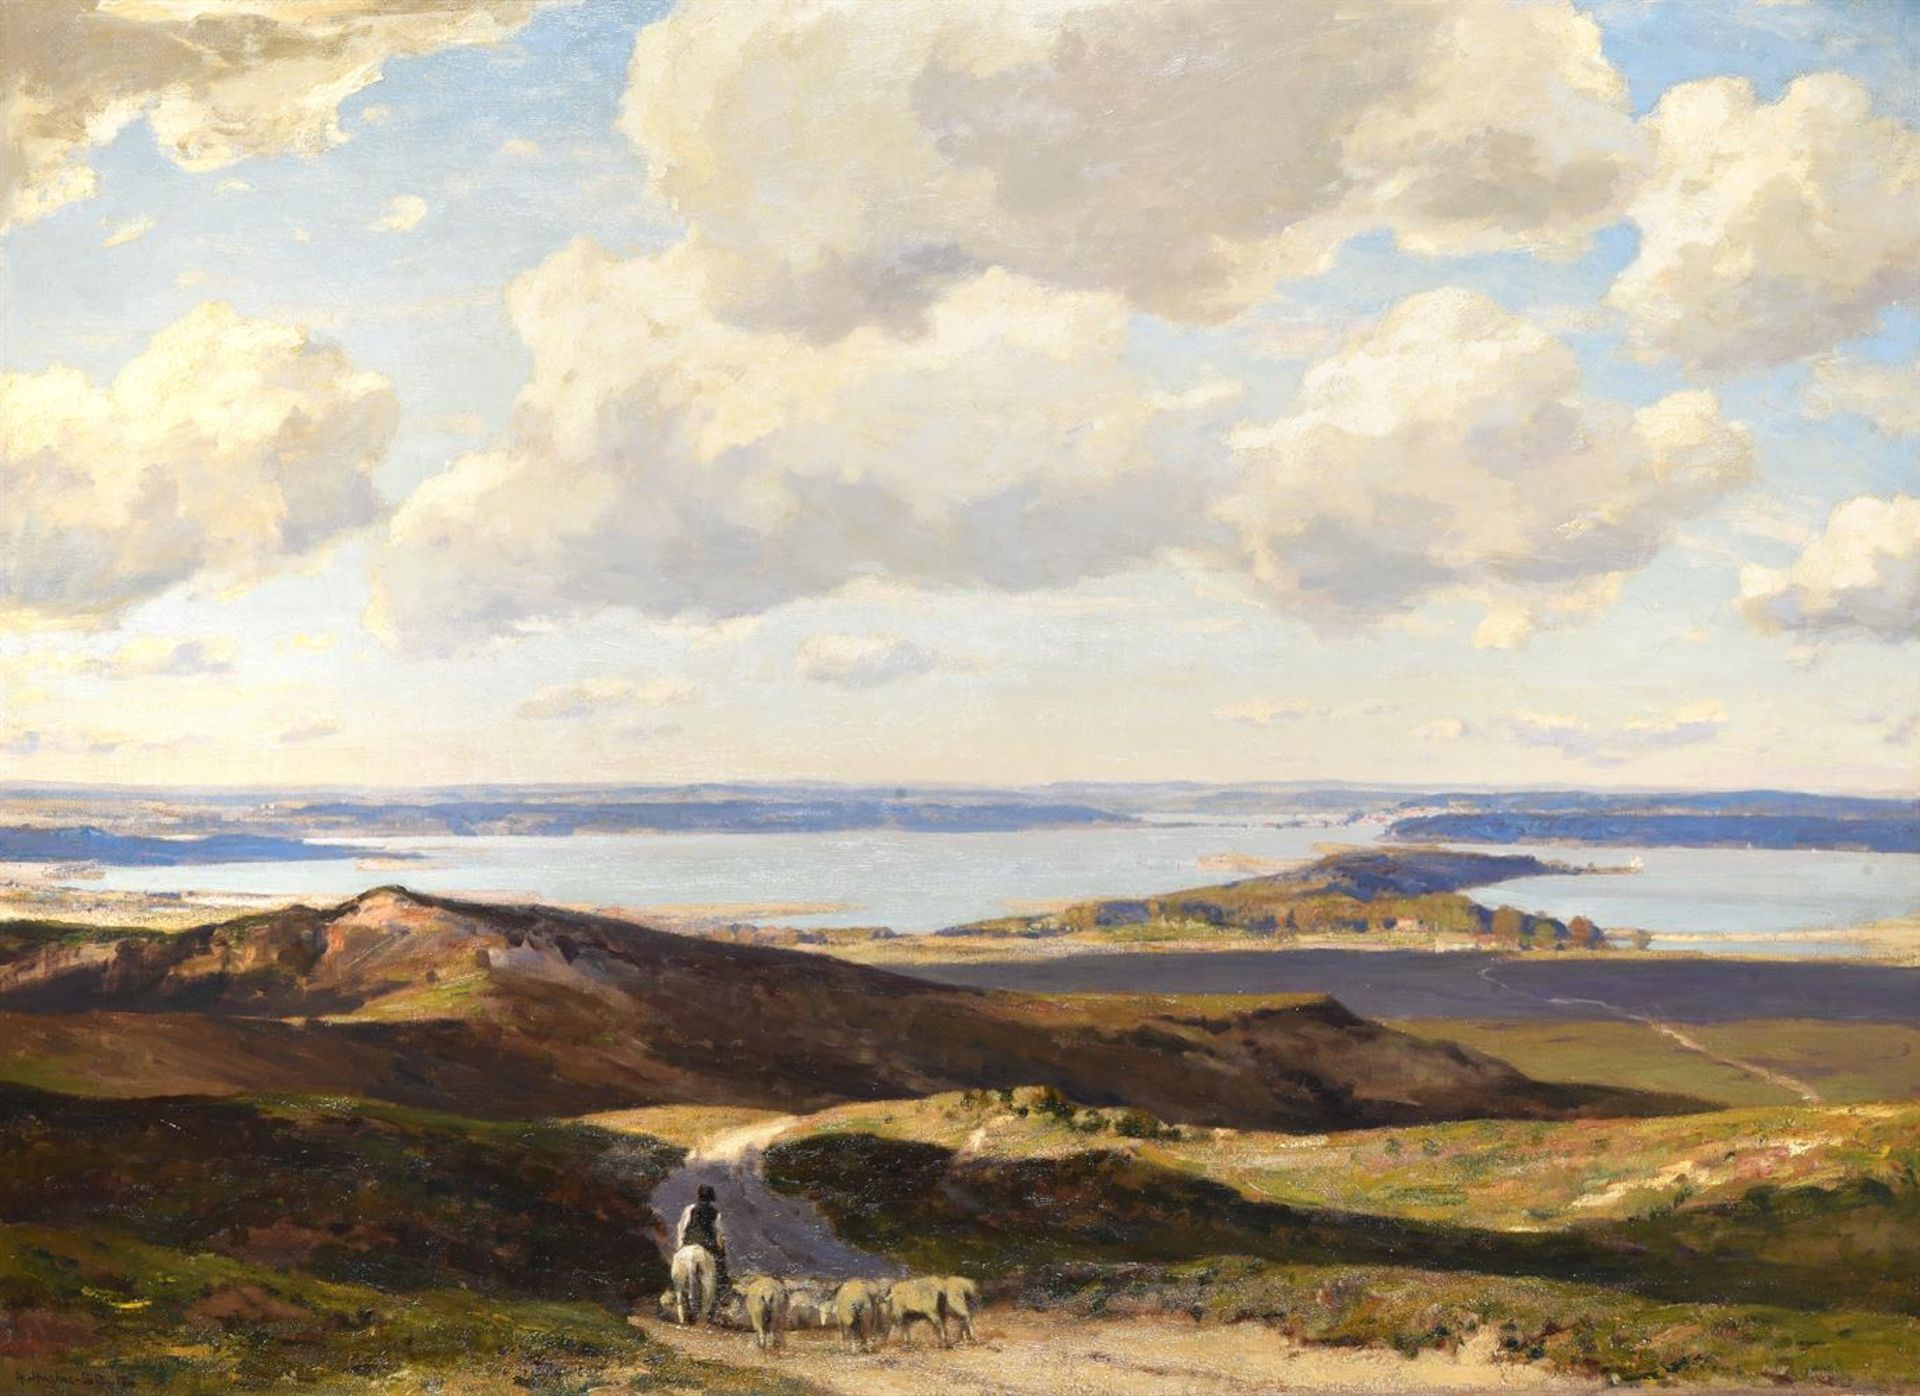 SIR HERBERT HUGHES-STANTON (BRITISH 1870-1937), STUDLAND BAY WITH POOLE HARBOUR IN THE DISTANCE